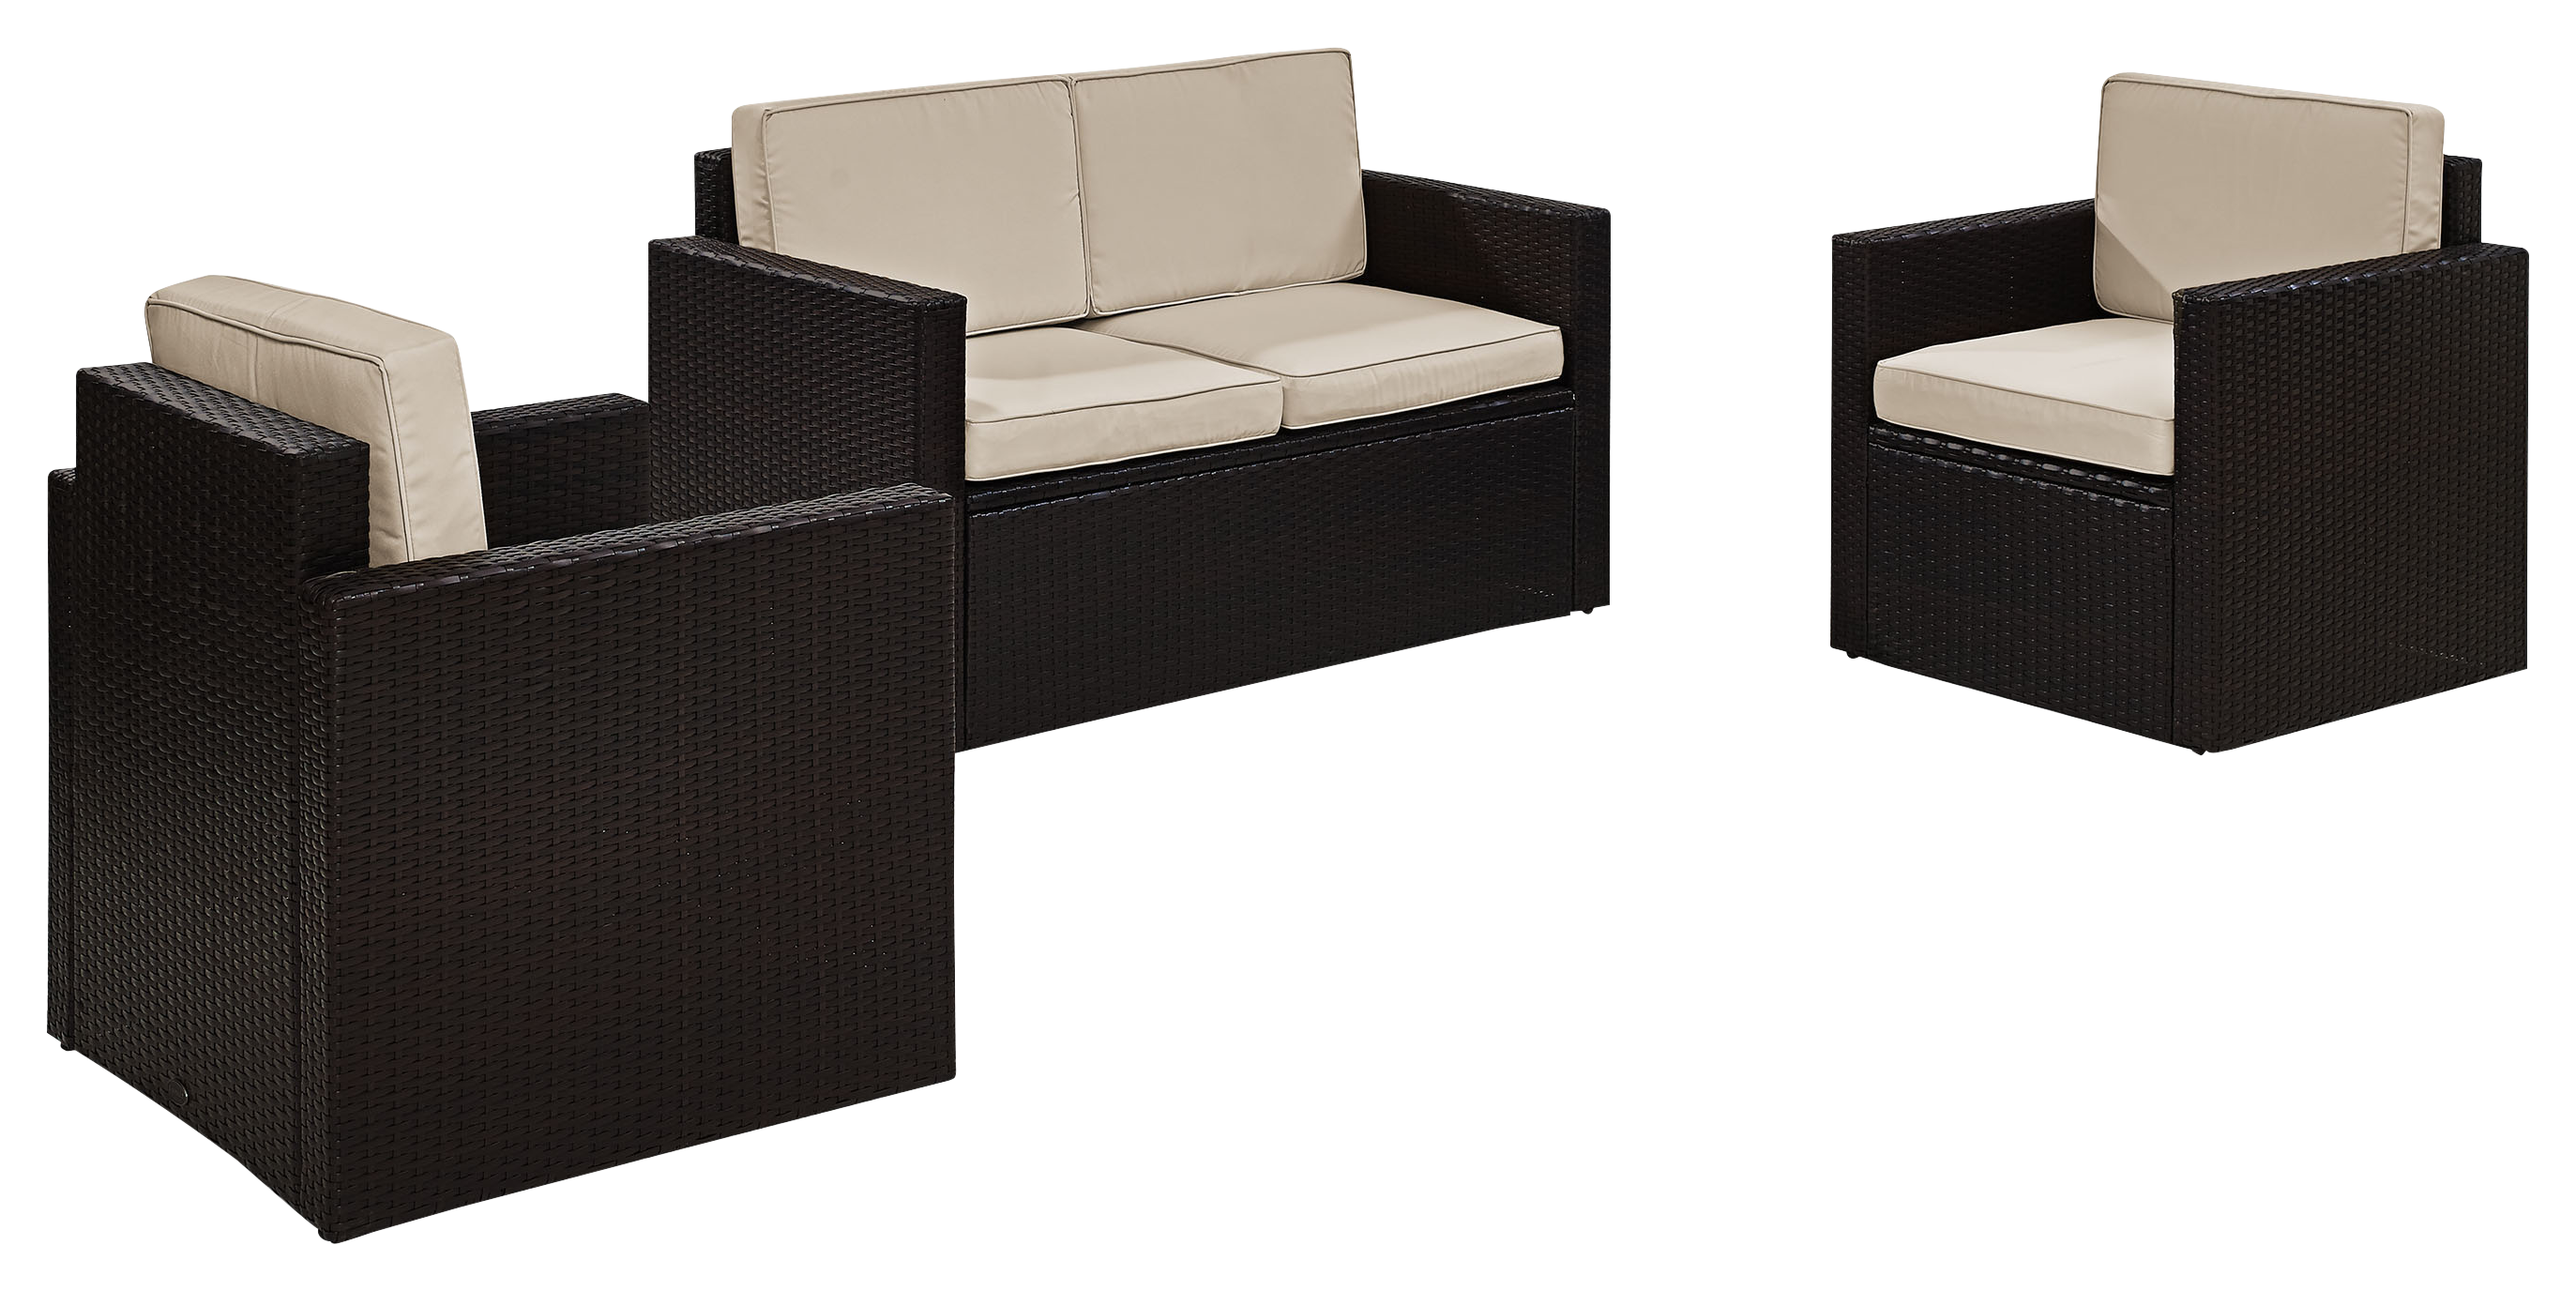 Crosley Palm Harbor Outdoor Wicker Loveseat and Armchairs 3-Piece Conversation Set